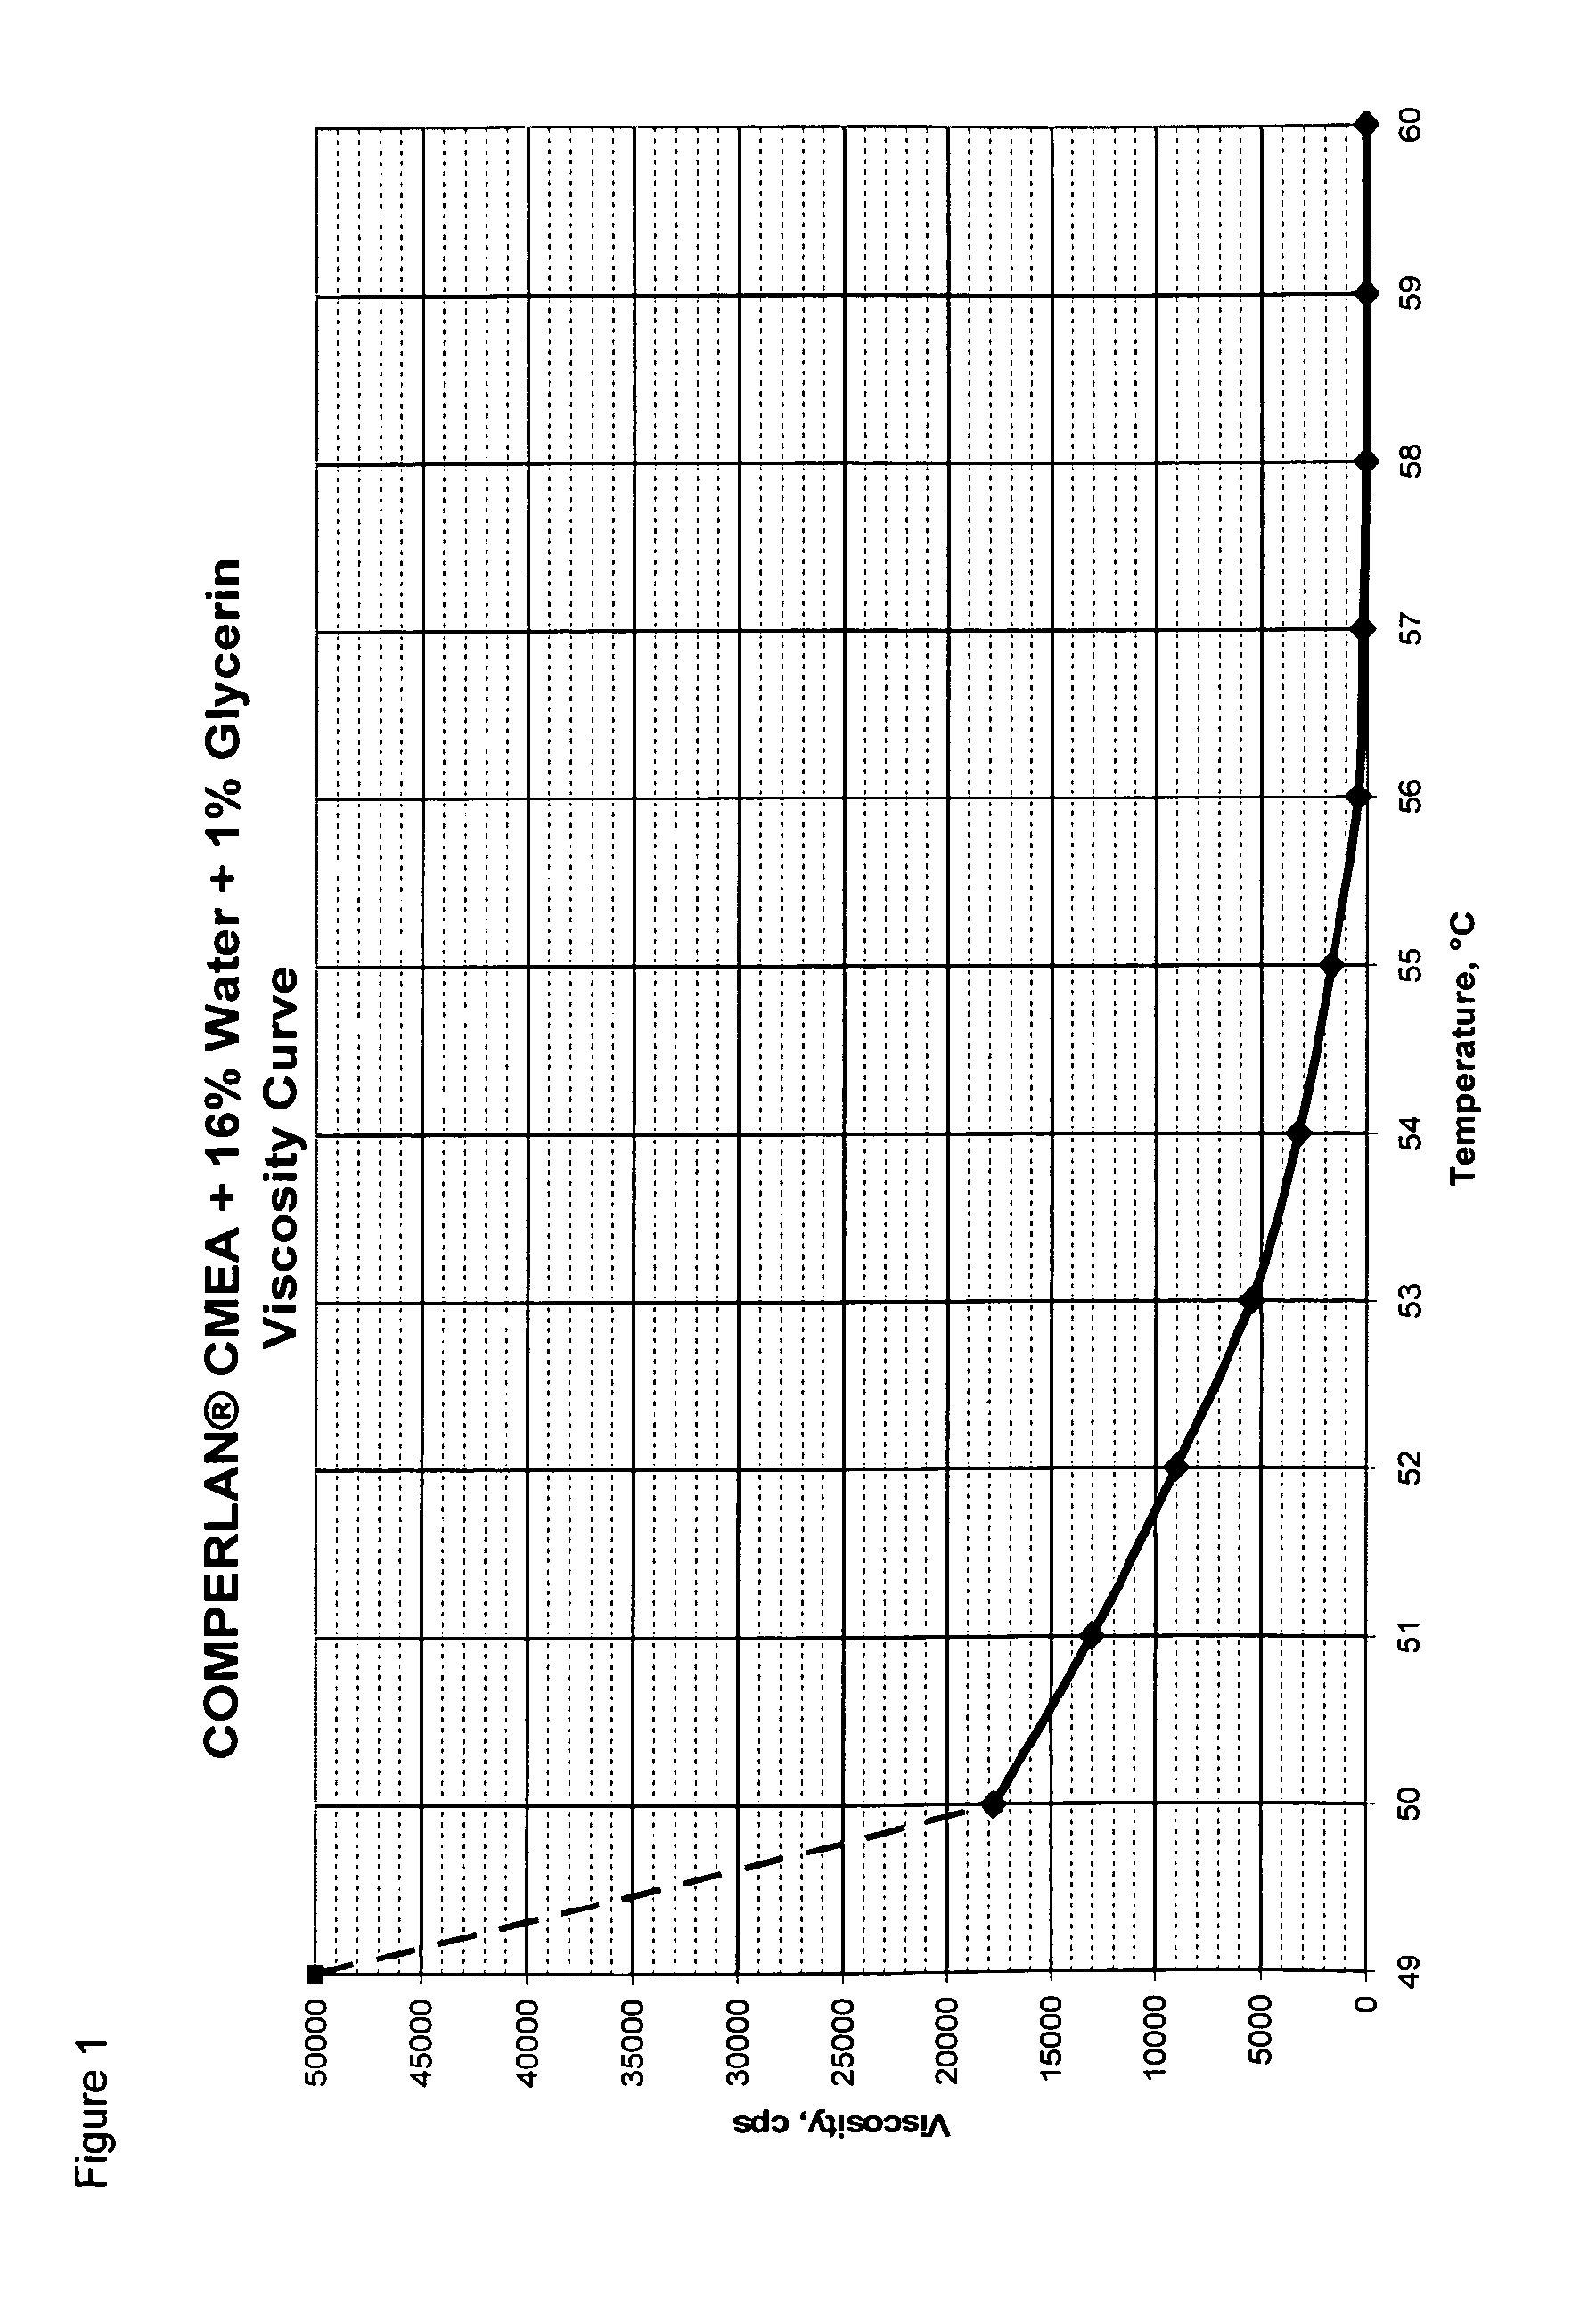 Fluid cocamide monoethanolamide concentrates and methods of preparation